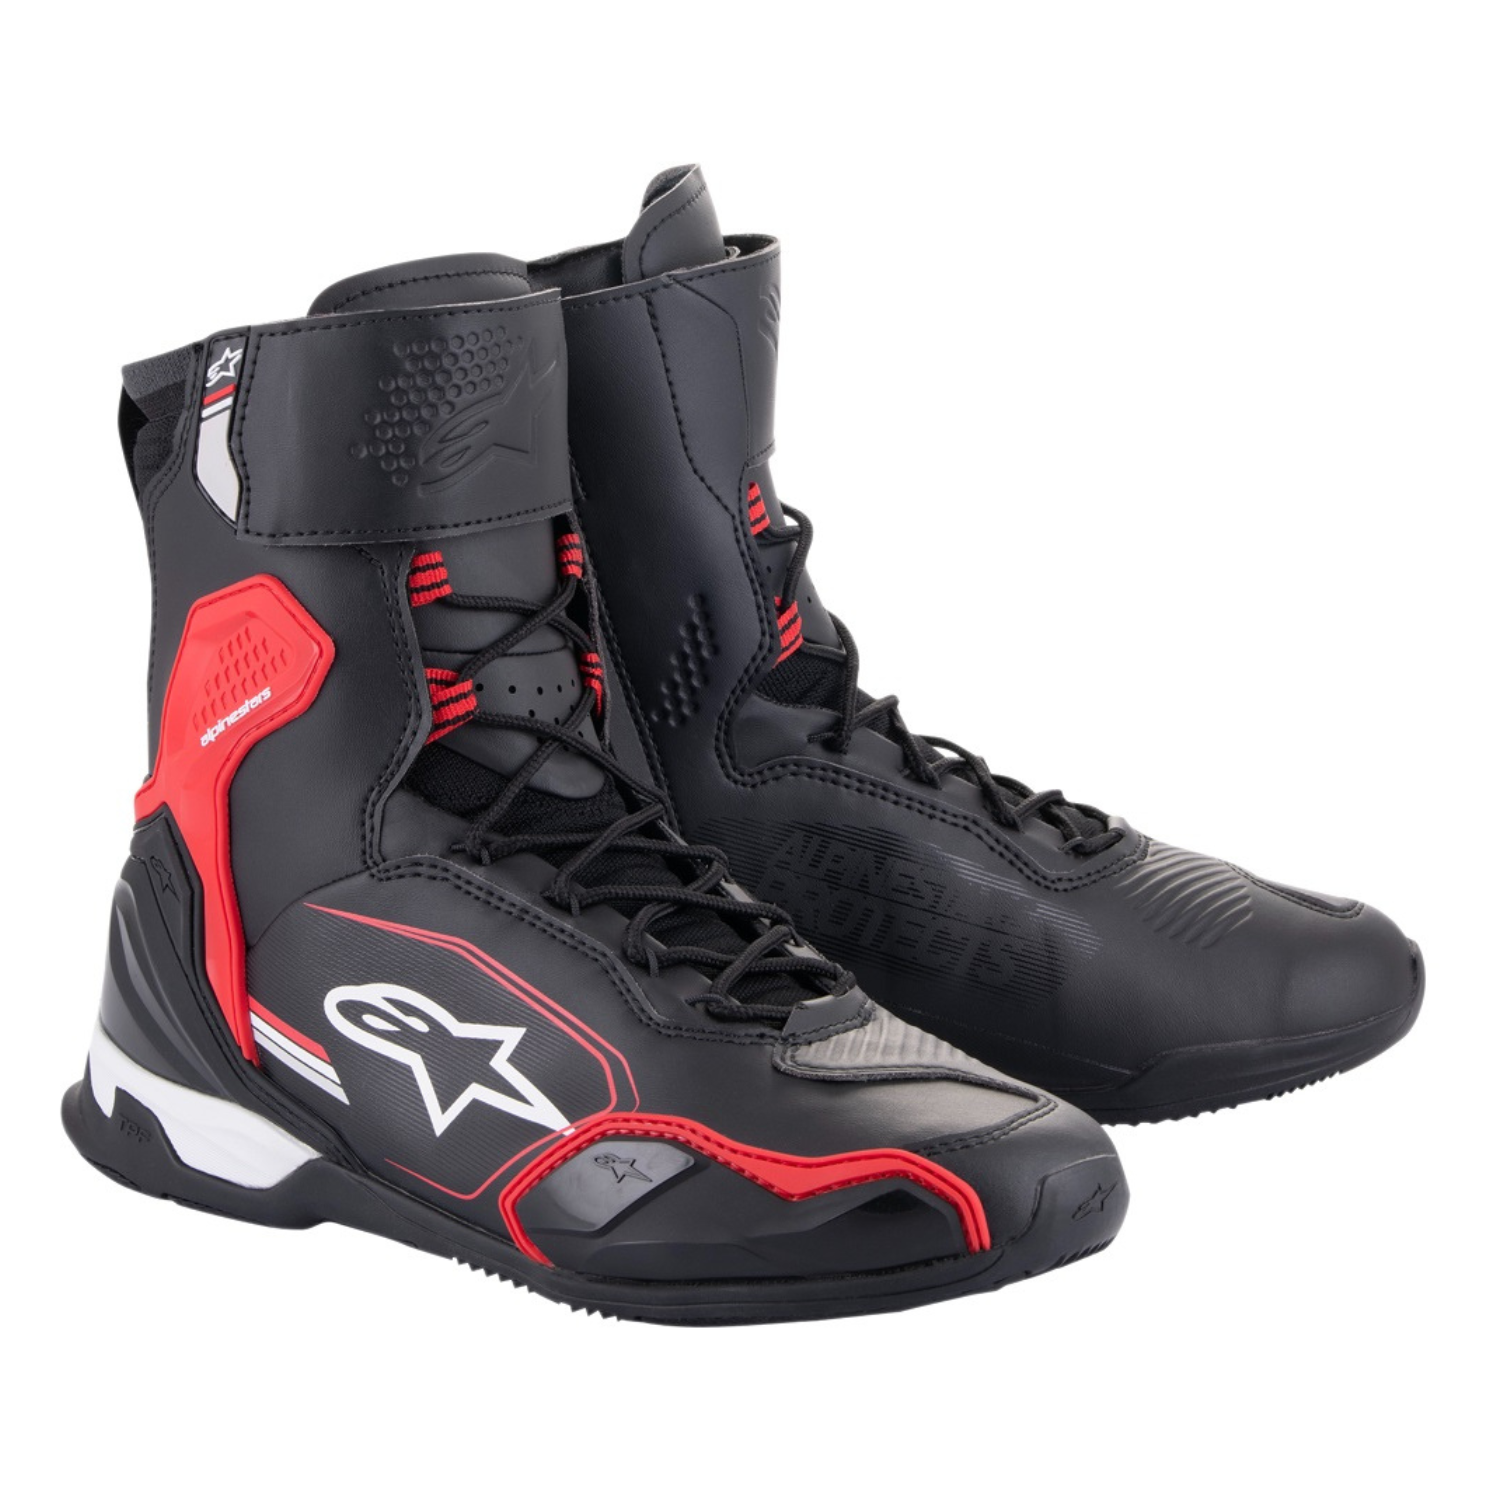 Image of EU Alpinestars Superfaster Shoes Black Bright Red White Taille US 115